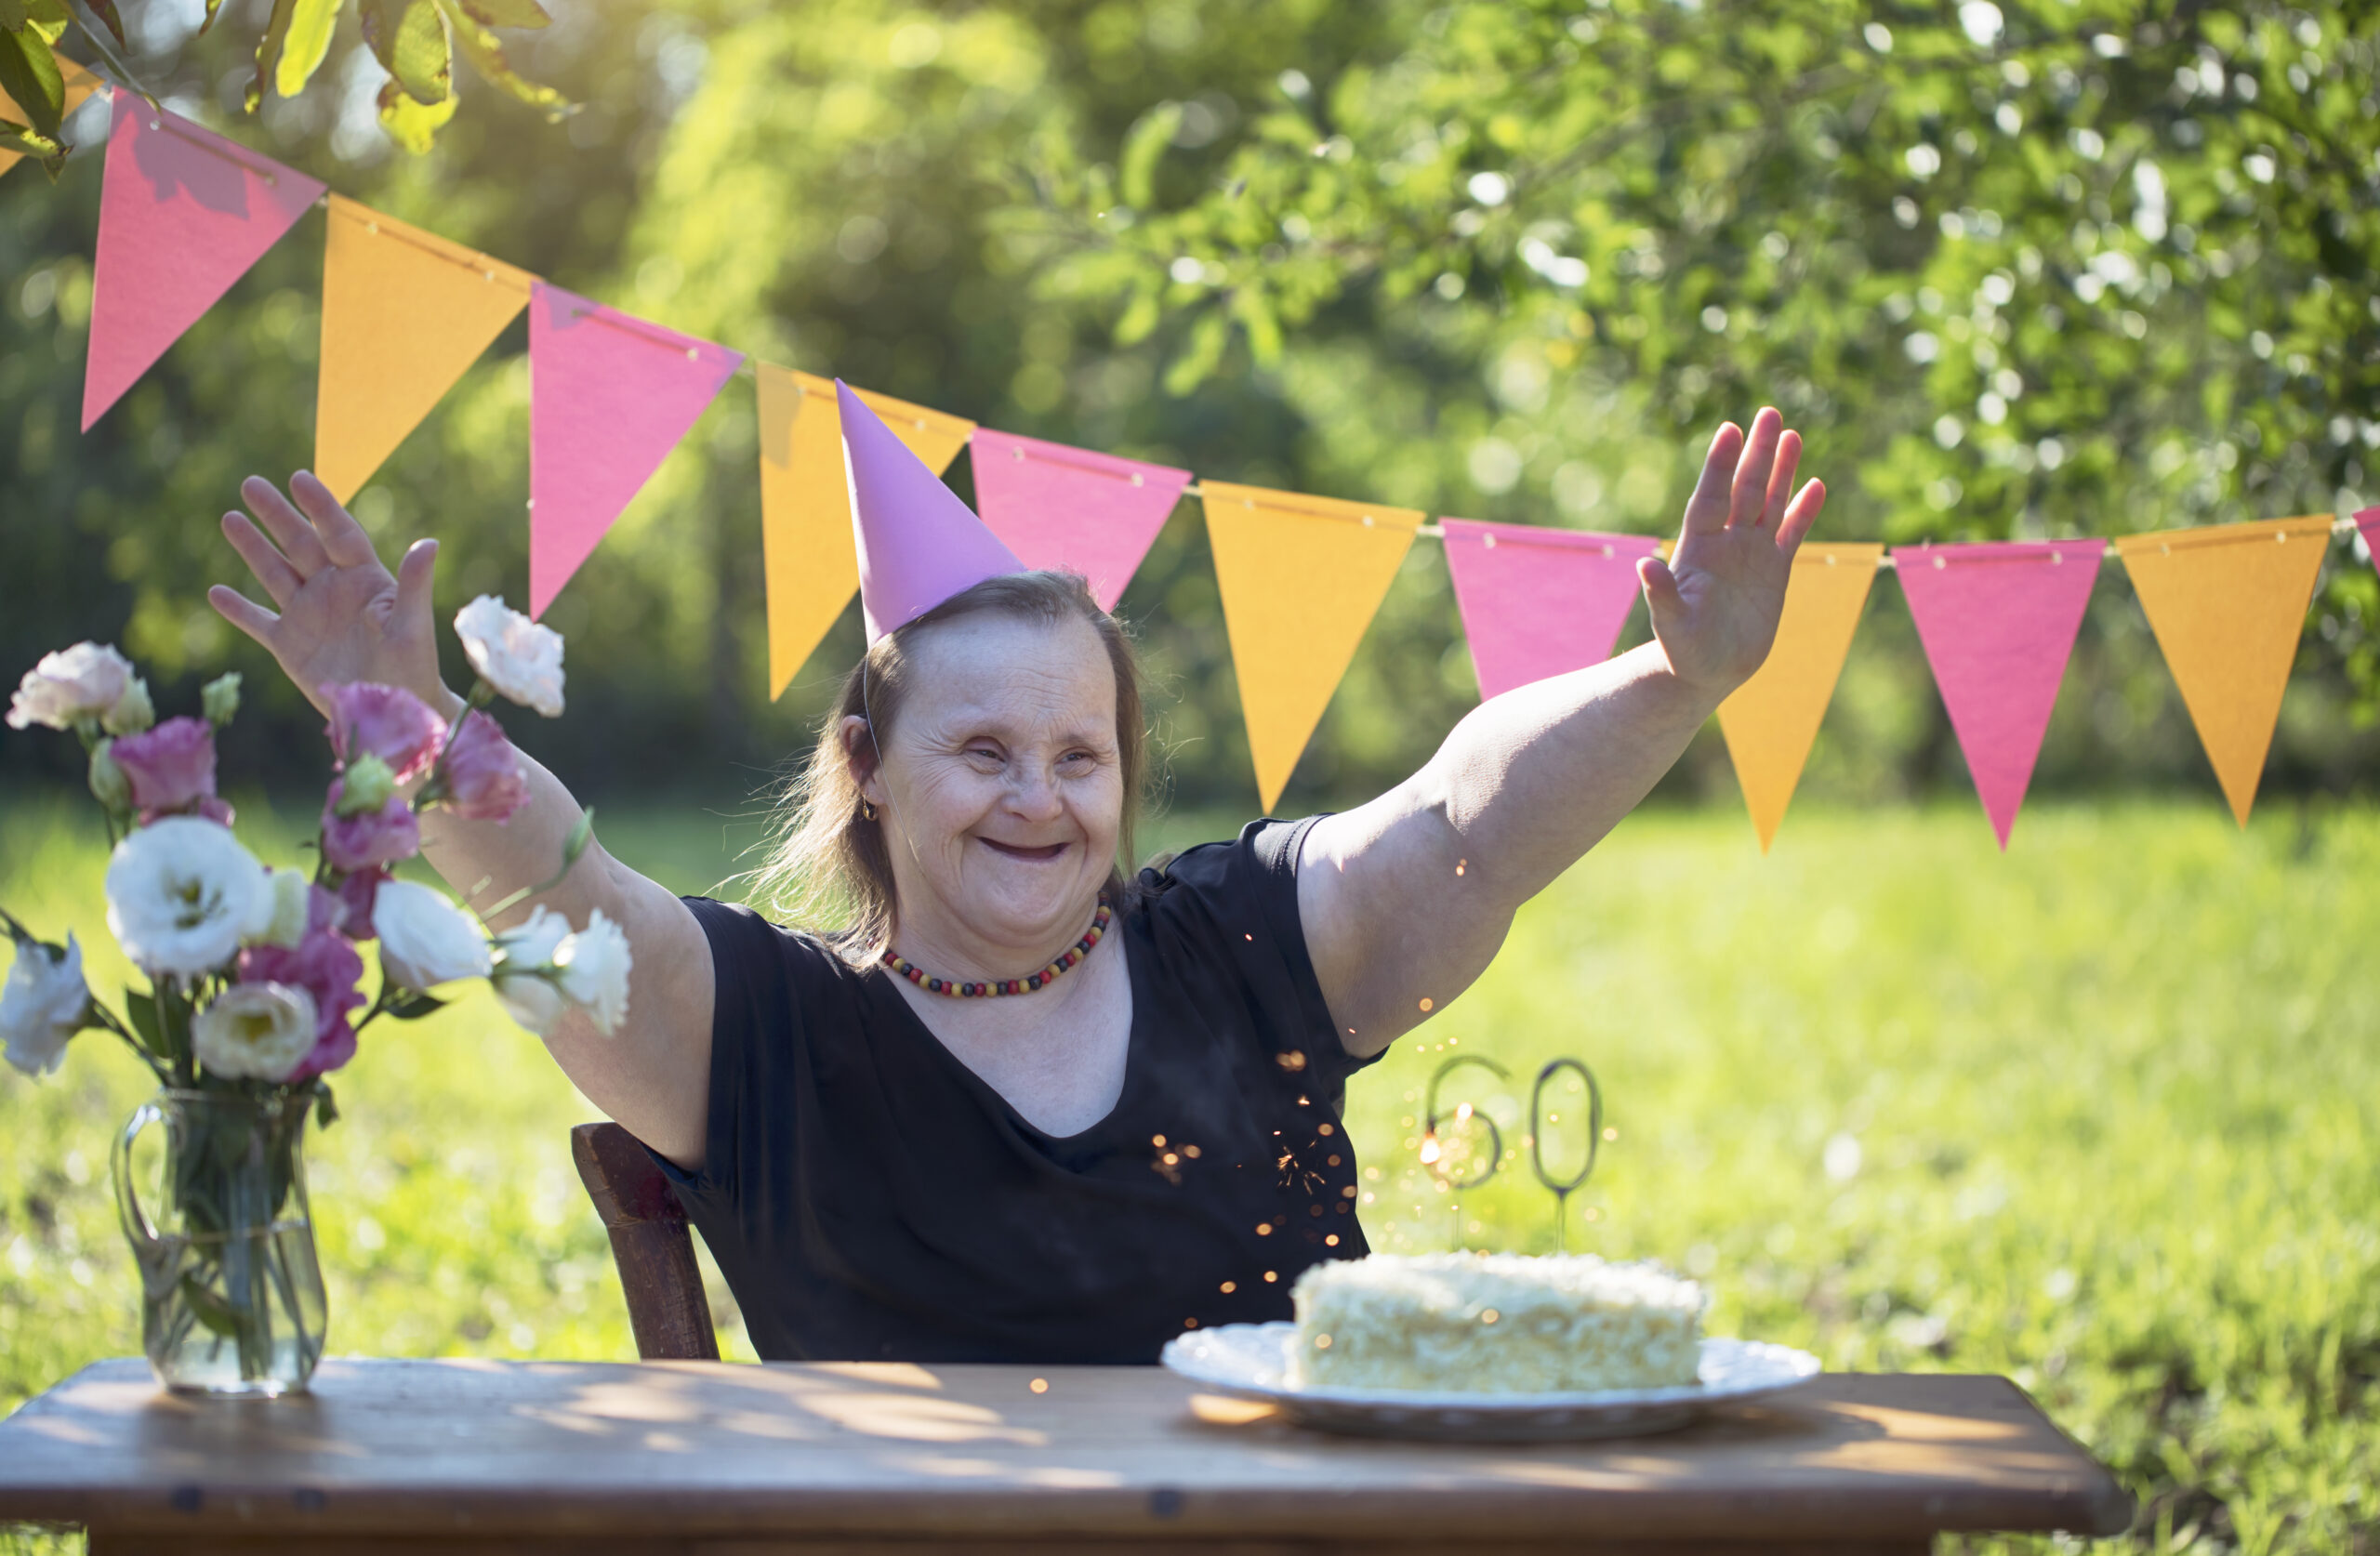 An adult living with an intellectual or developmental disability smiling with their hands in the air while sitting at a table with a birthday cake and birthday hat on.